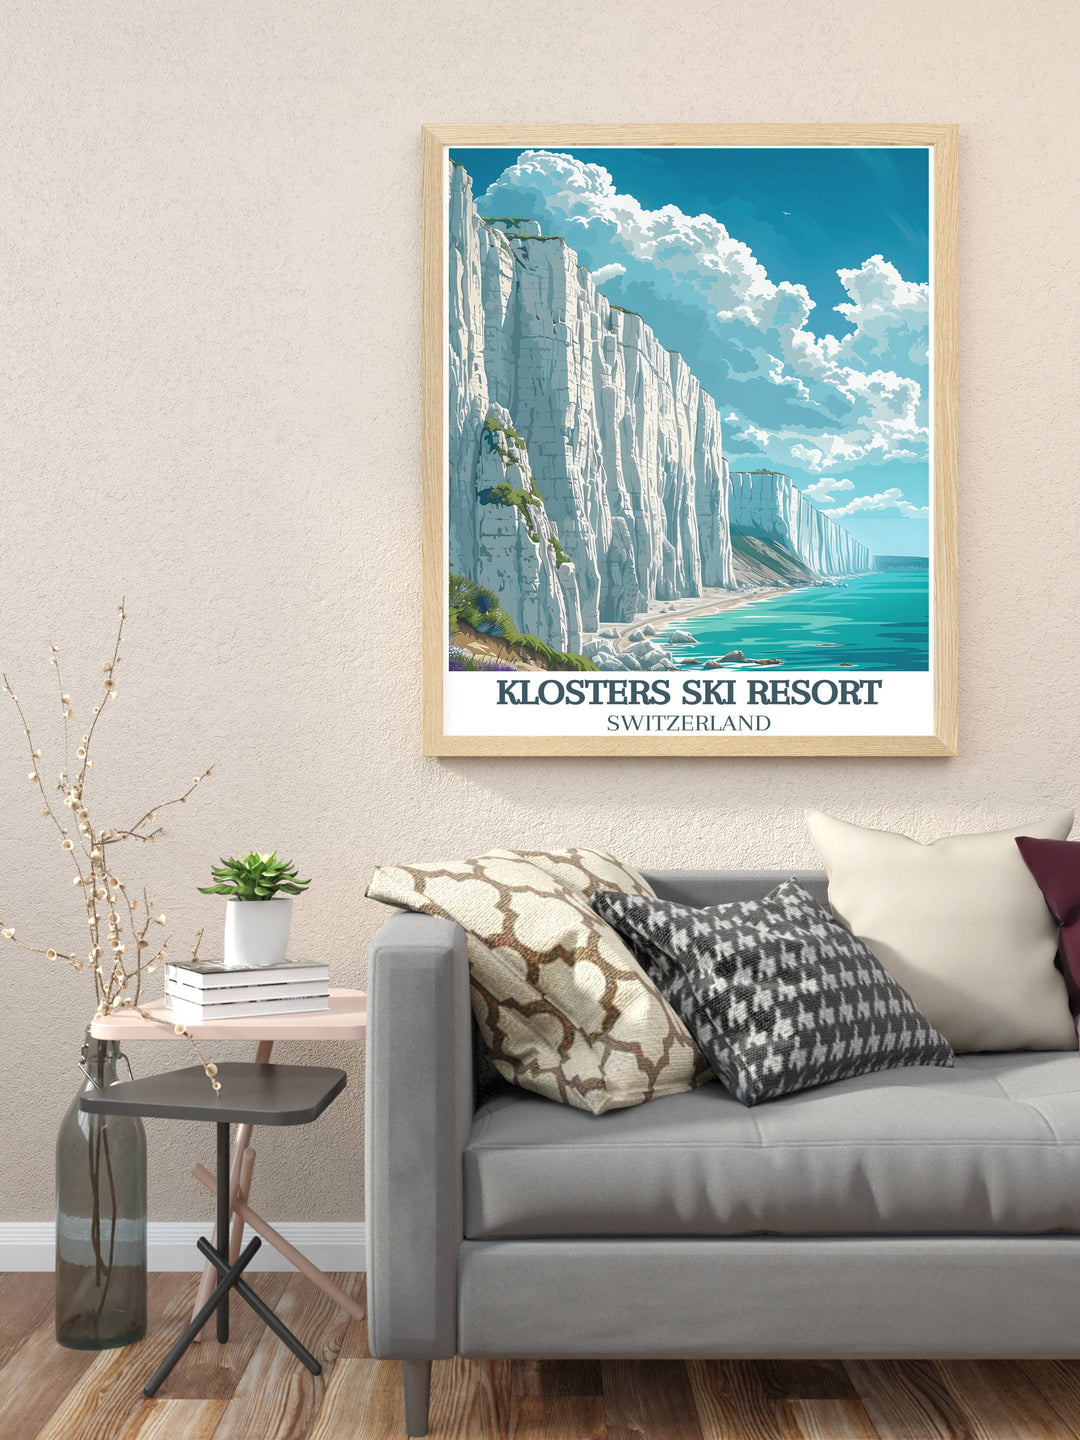 Transform your living space with our White Cliffs of Dover wall art. This White Cliffs of Dover travel poster features stunning artwork that highlights the cliffs serene beauty and elegance. Perfect for adding a touch of sophistication to any room